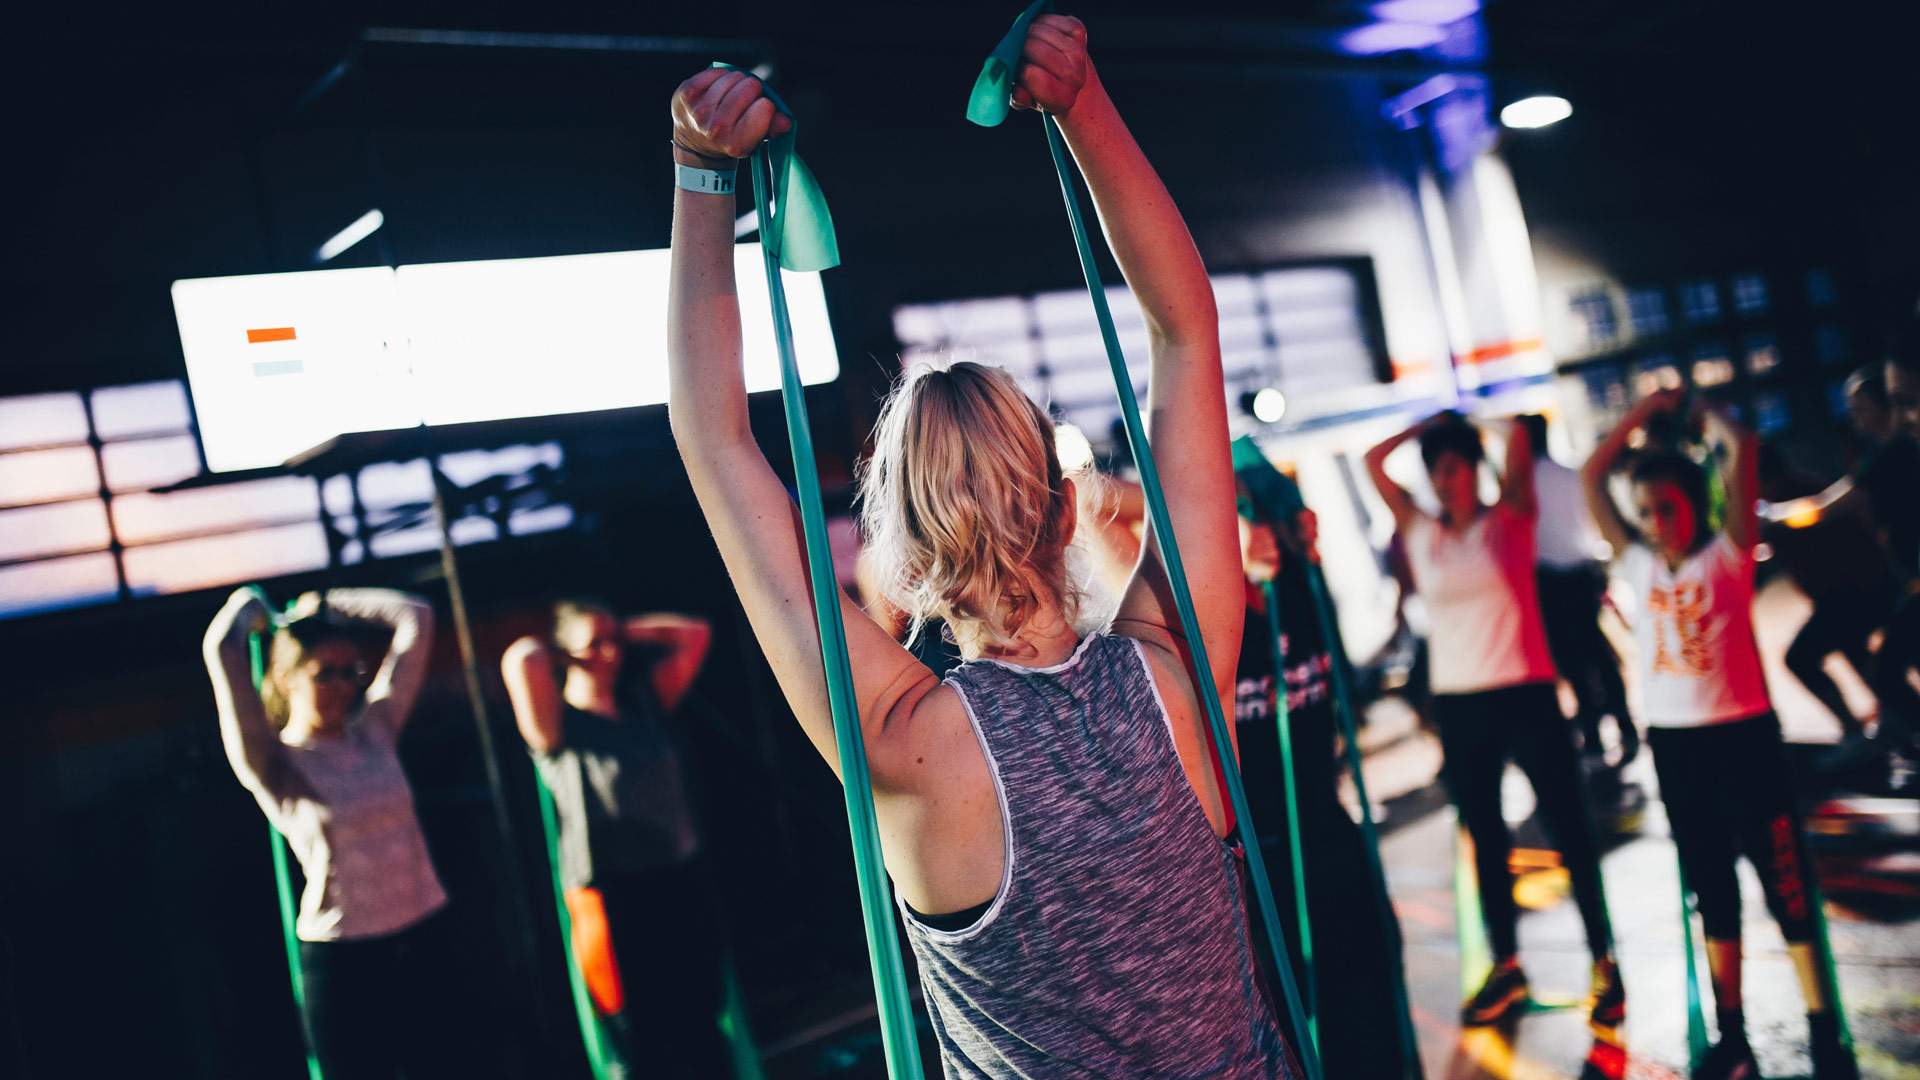 The Victorian Government Is Offering a Slew of Free and Discounted Fitness Classes This April